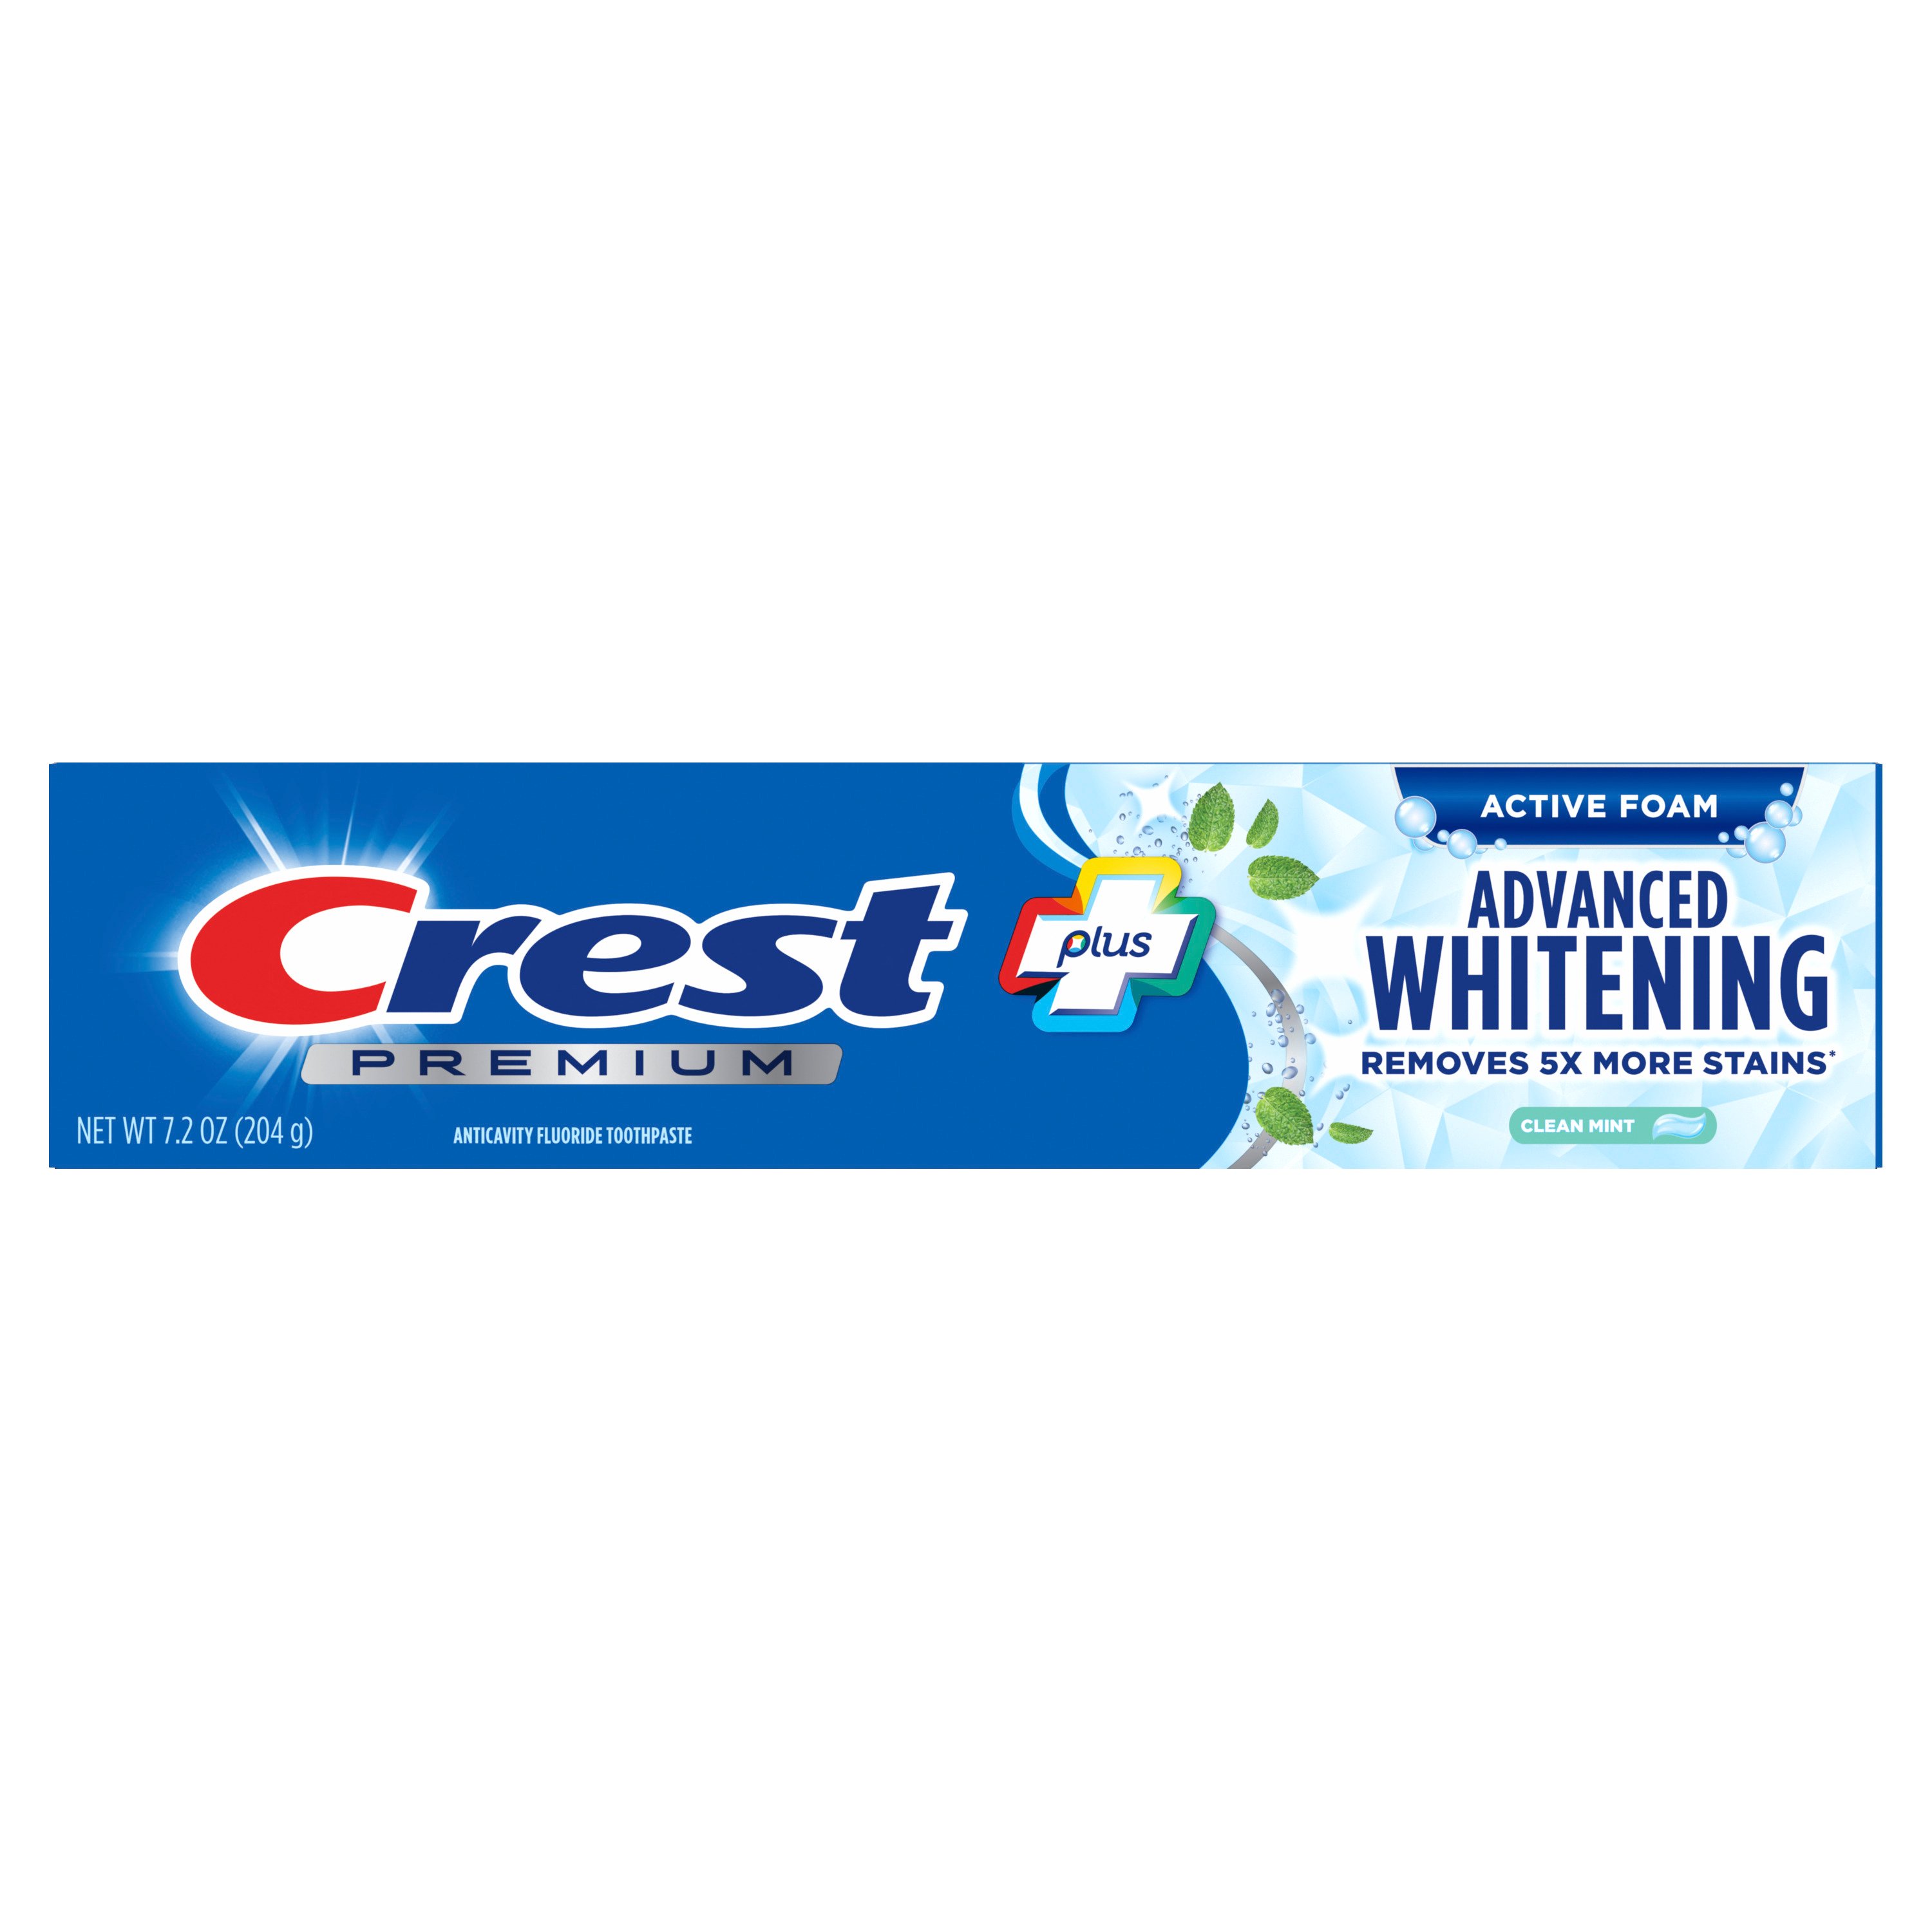 Crest Premium Plus Advanced Whitening Toothpaste Clean MInt Shop  Toothpaste at H-E-B